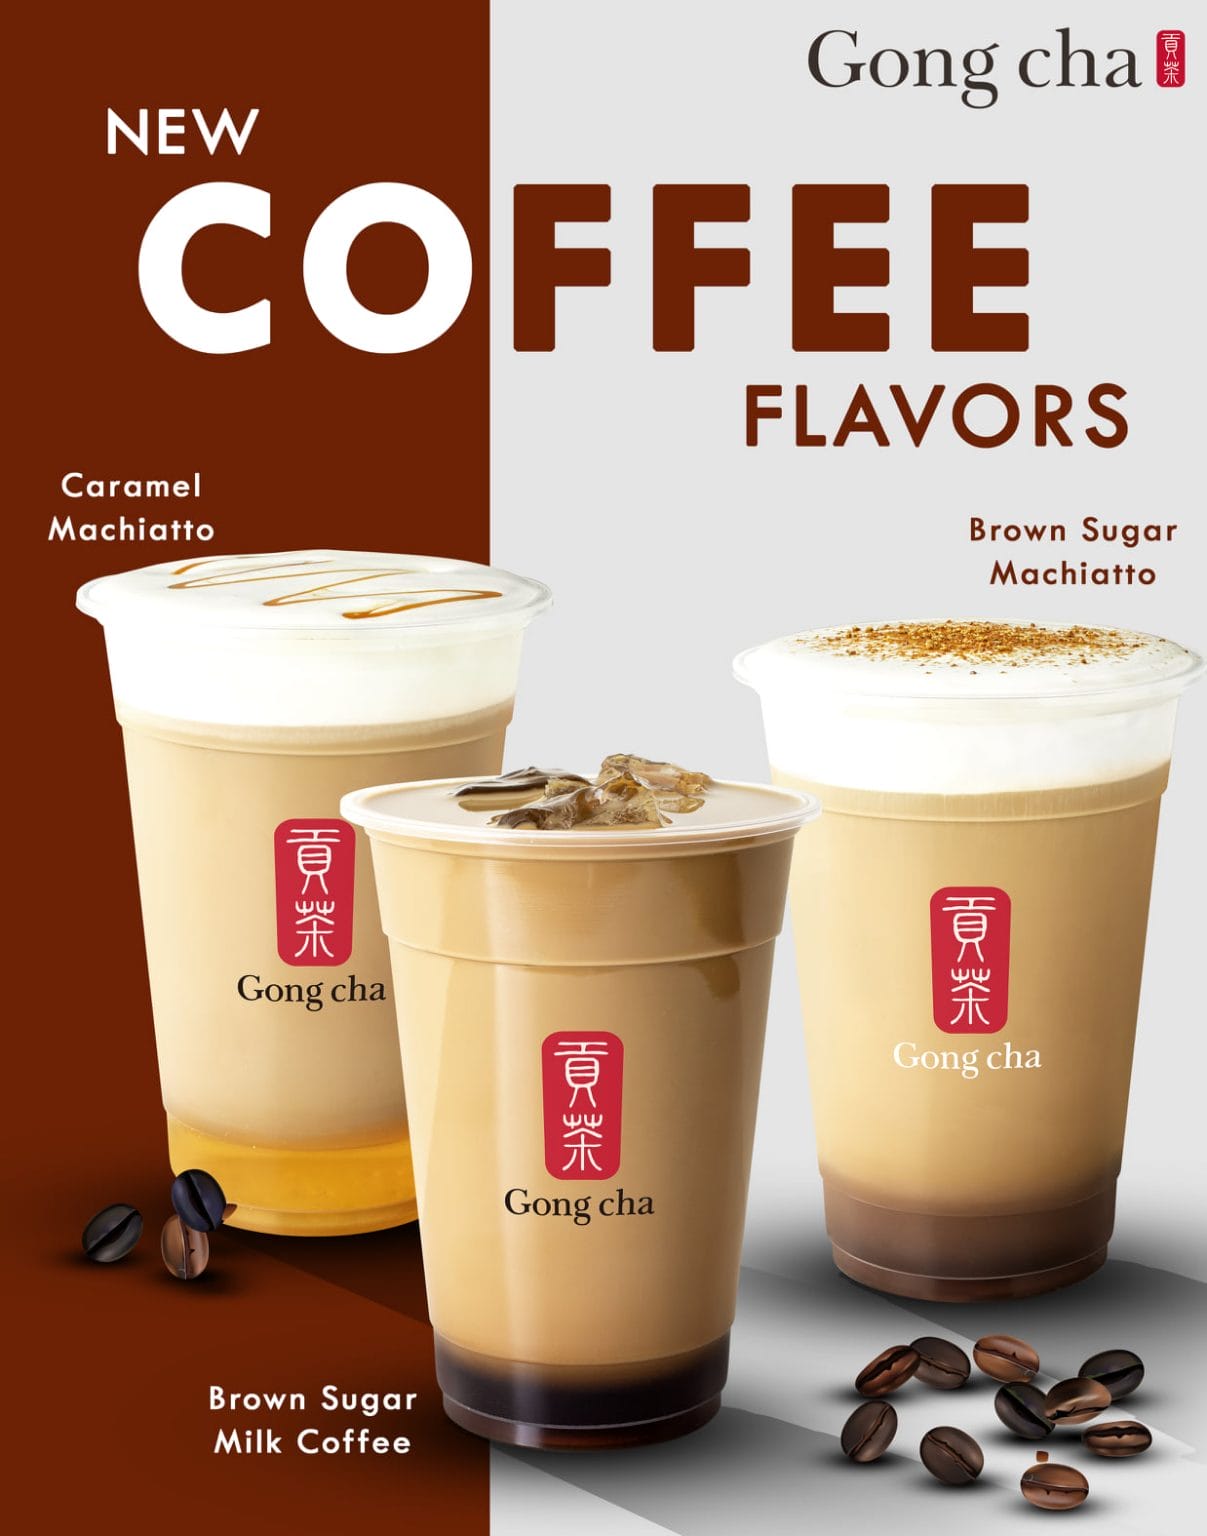 Gong cha Introducing New Coffee Flavors Deals Pinoy